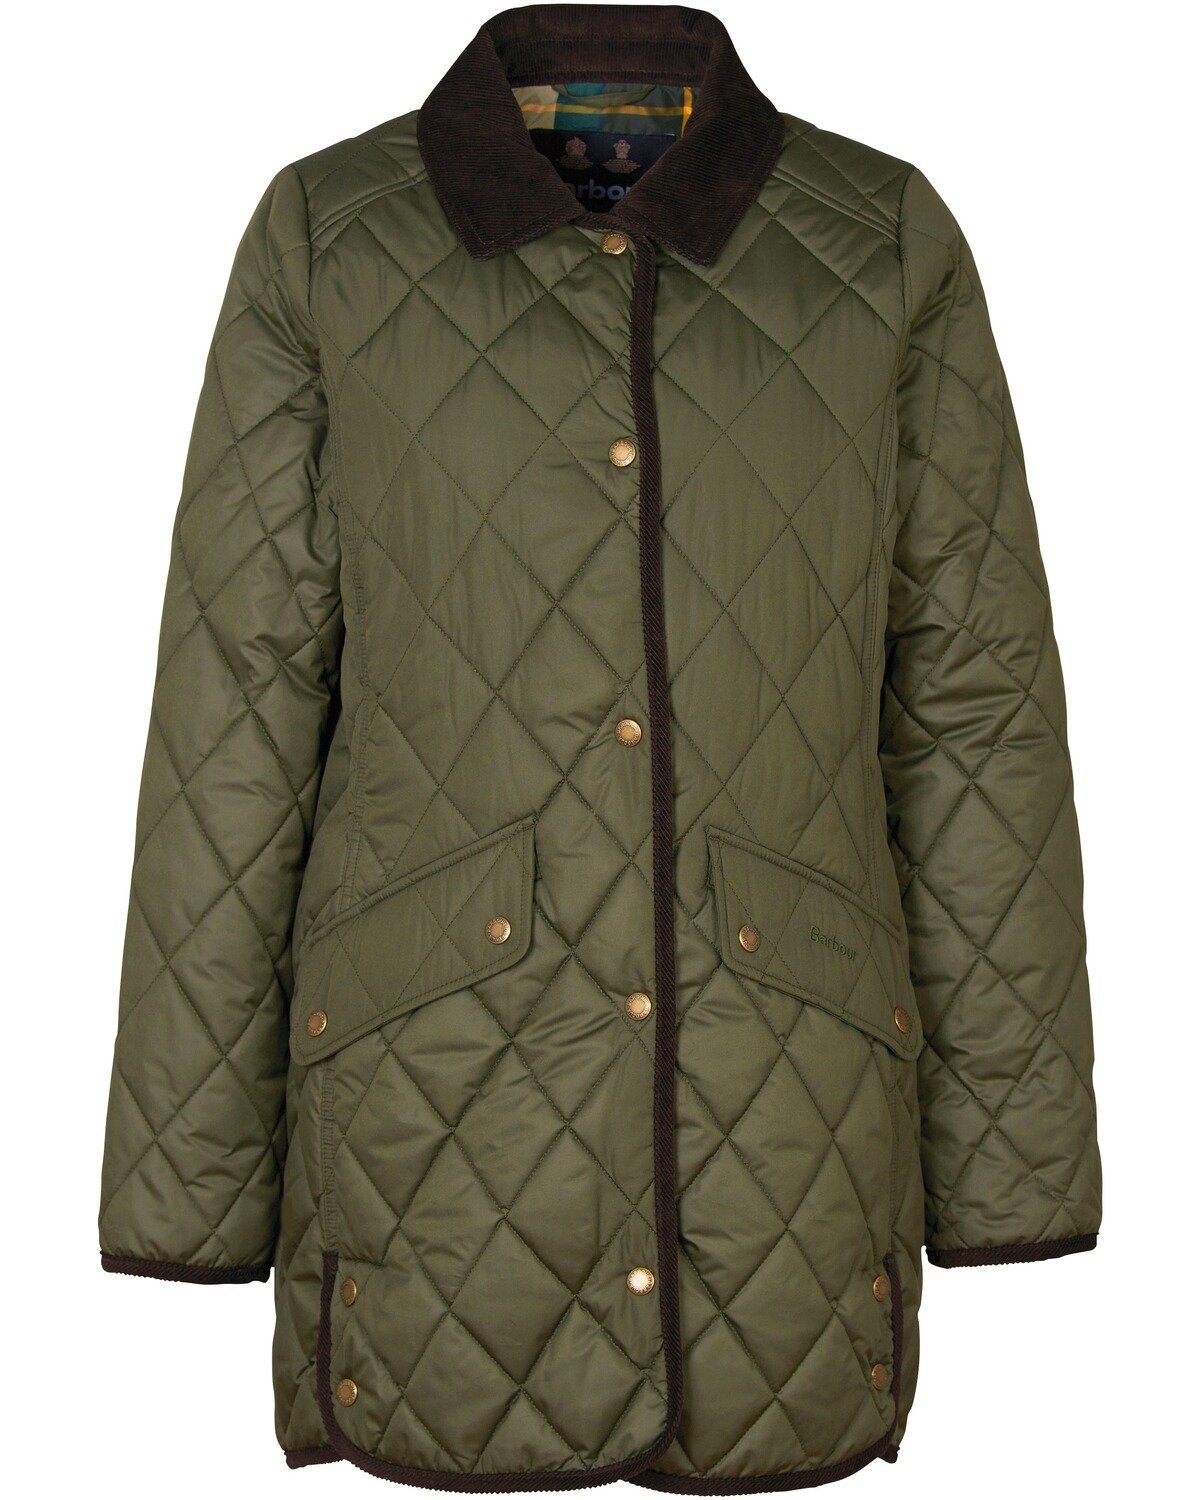 Long Cavalry Barbour Olive/Ancient Steppjacke Steppjacke